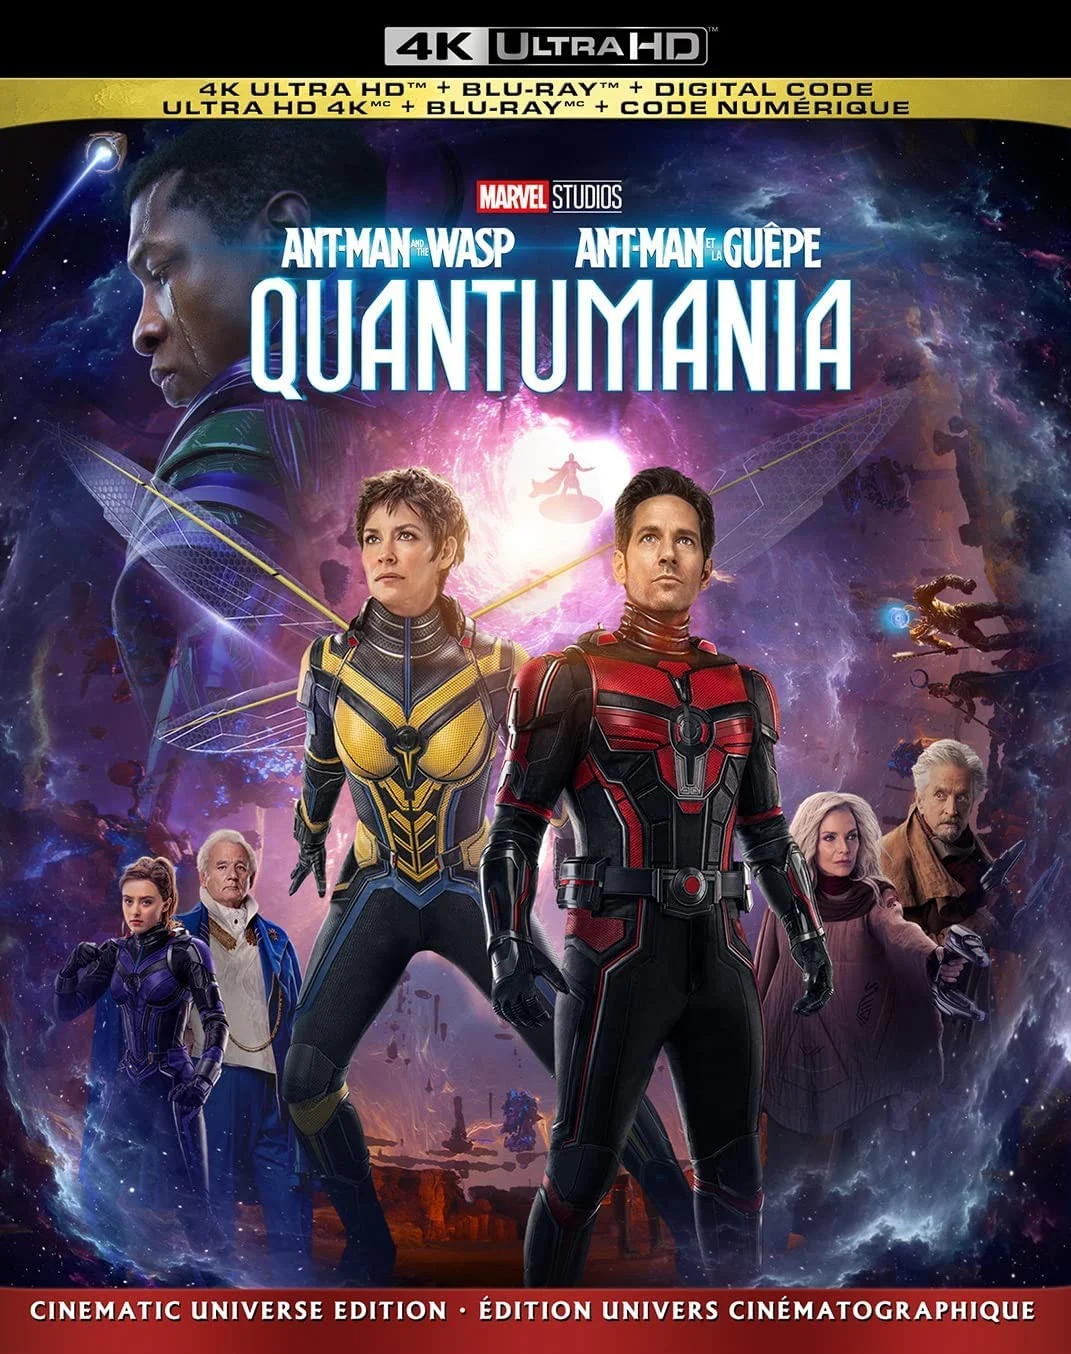 Ant-Man and the Wasp: Quantumania (4K-UHD) on MovieShack